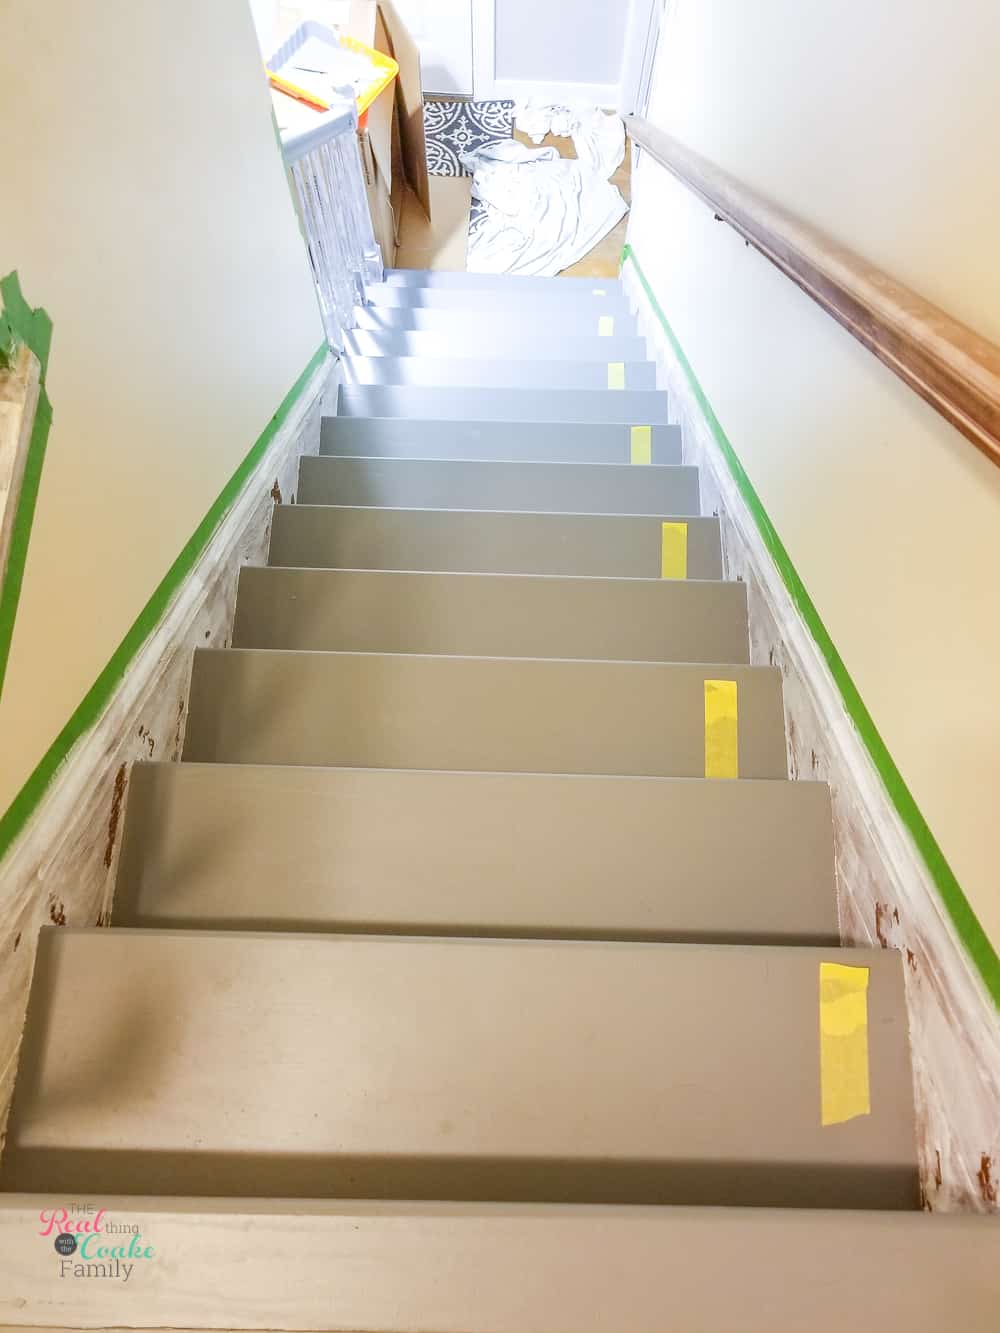 delicate painters tape on every other tread to show where to walk when painting stair treads